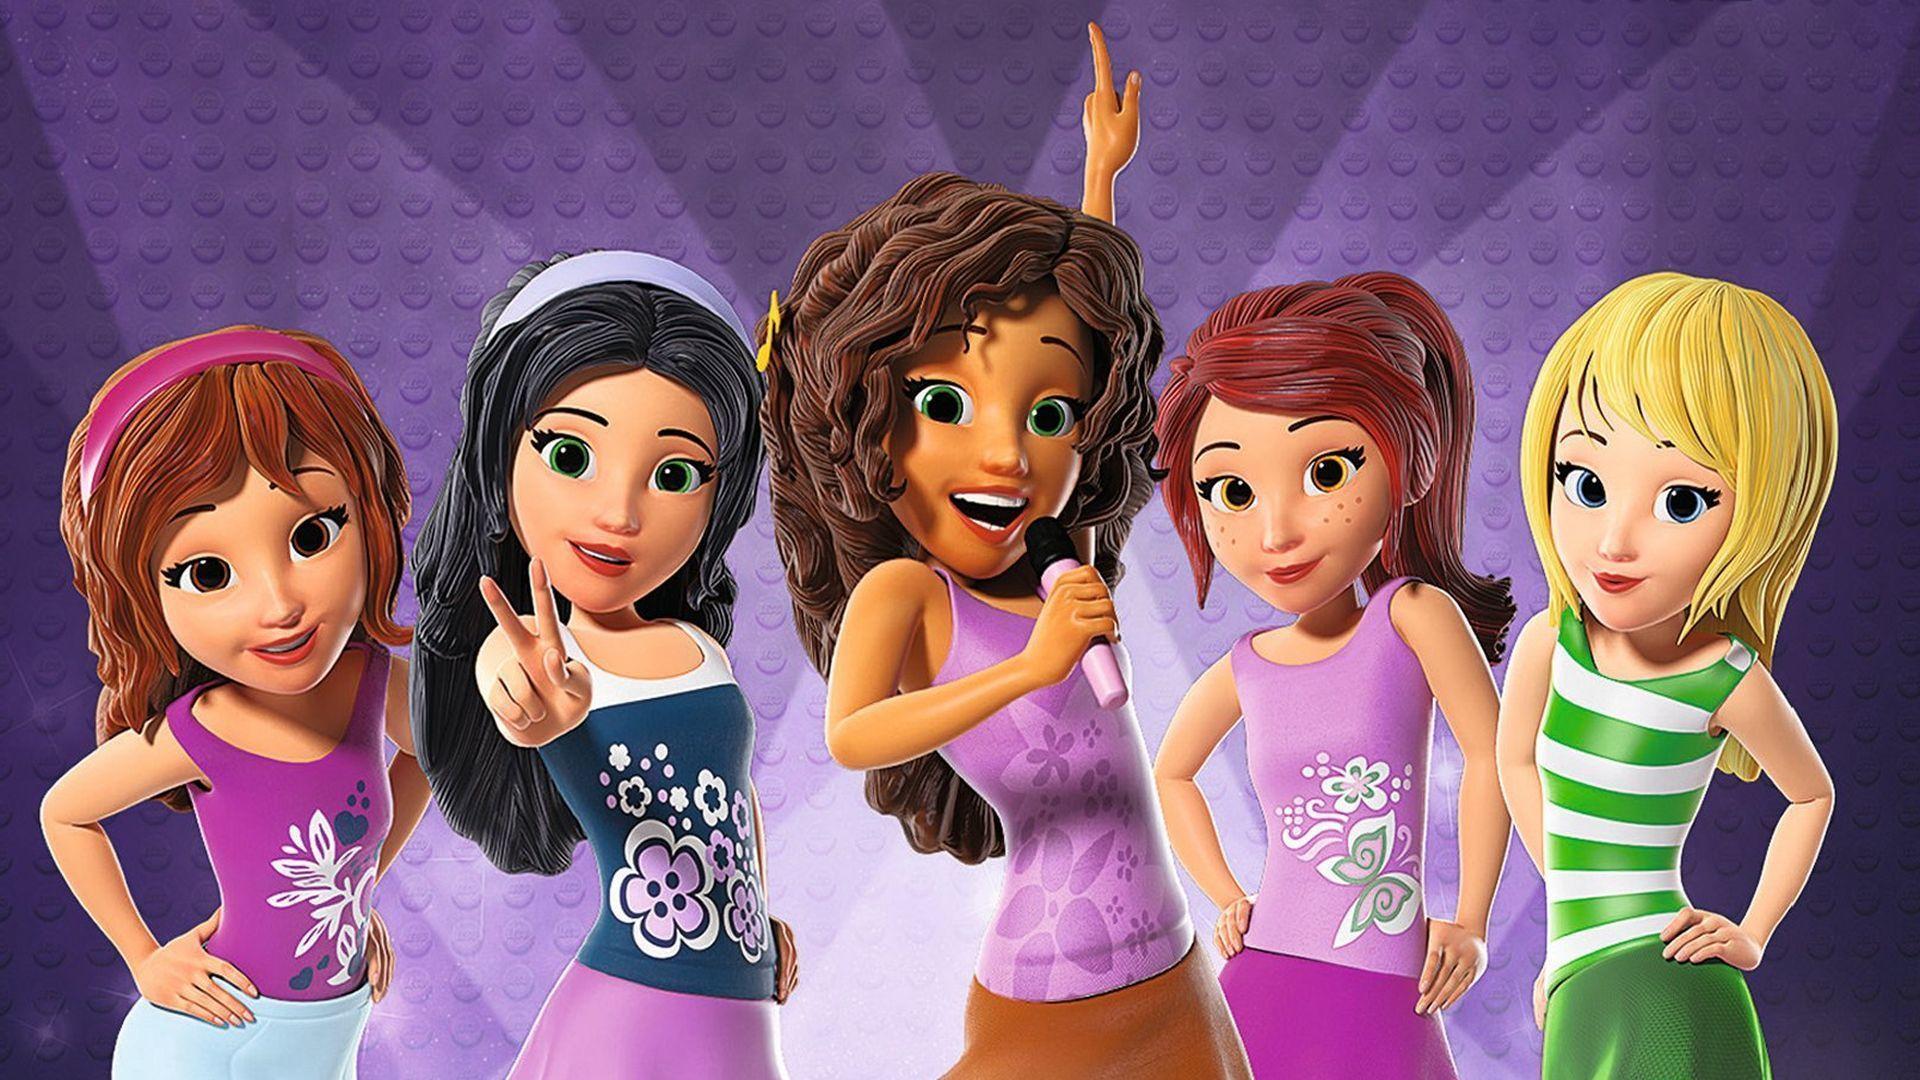 LEGO Friends Wallpapers - Wallpaper Cave.